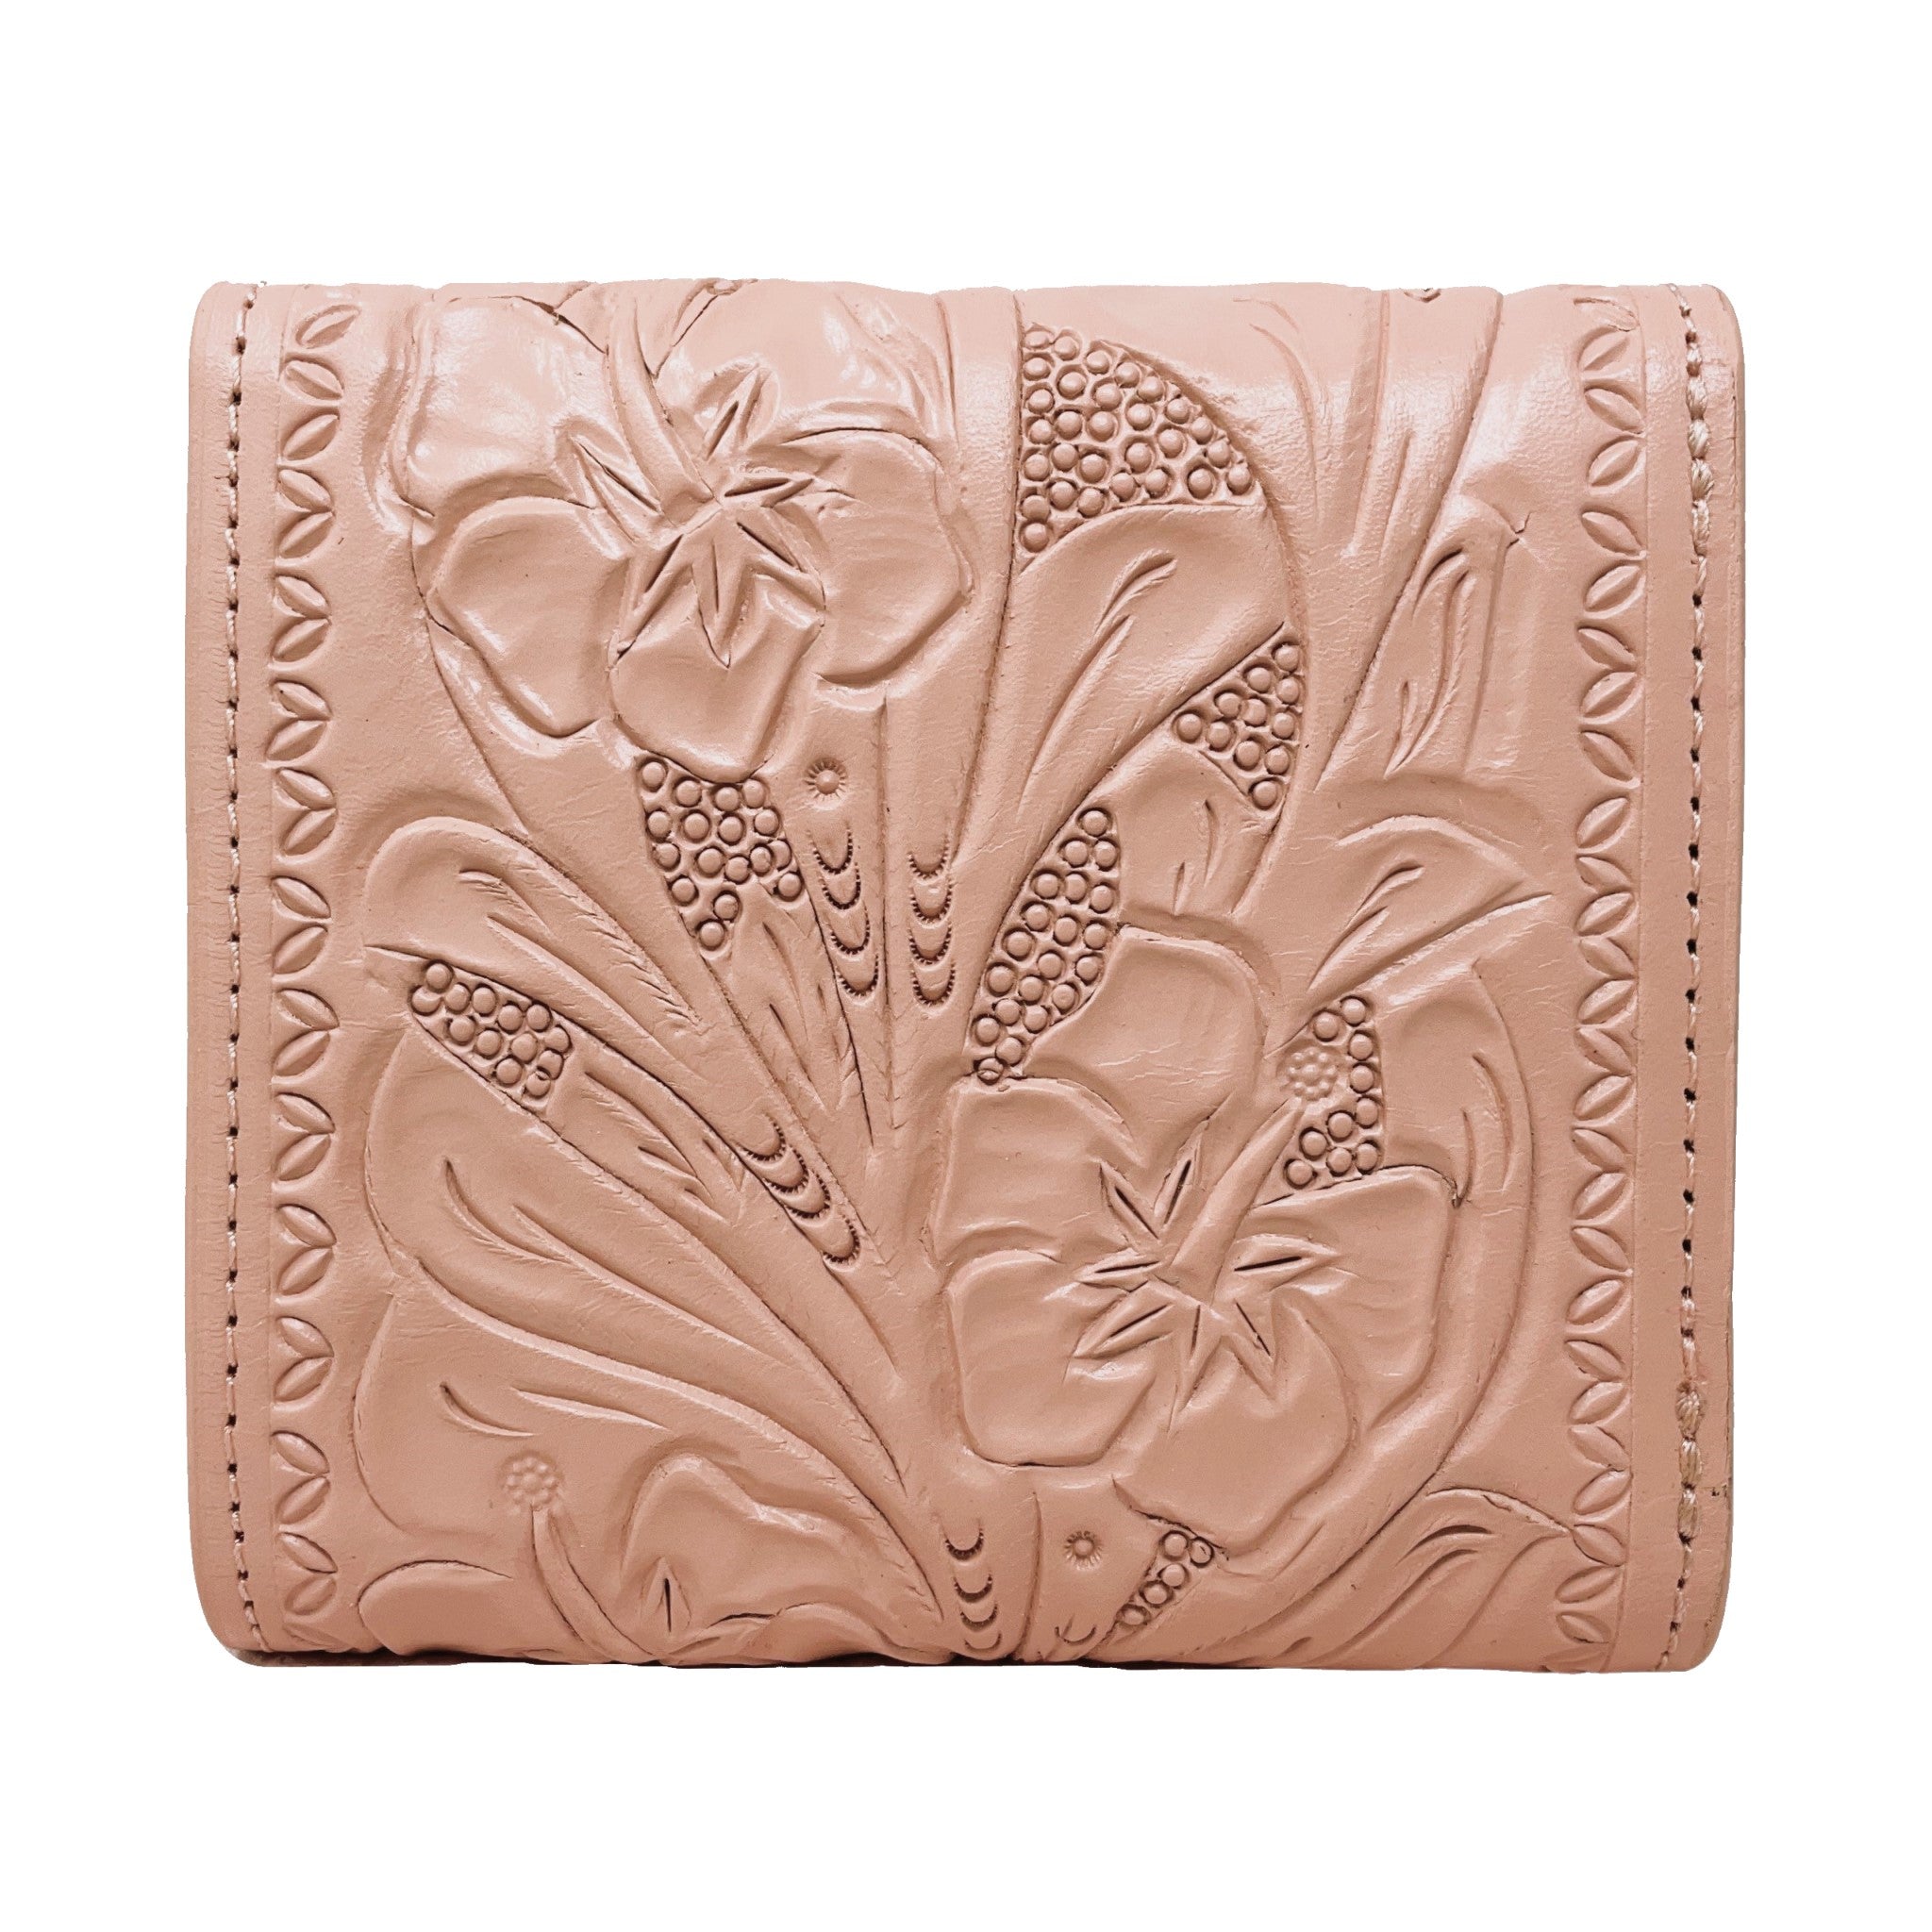 Bailey Wallet in Cherry Blossom